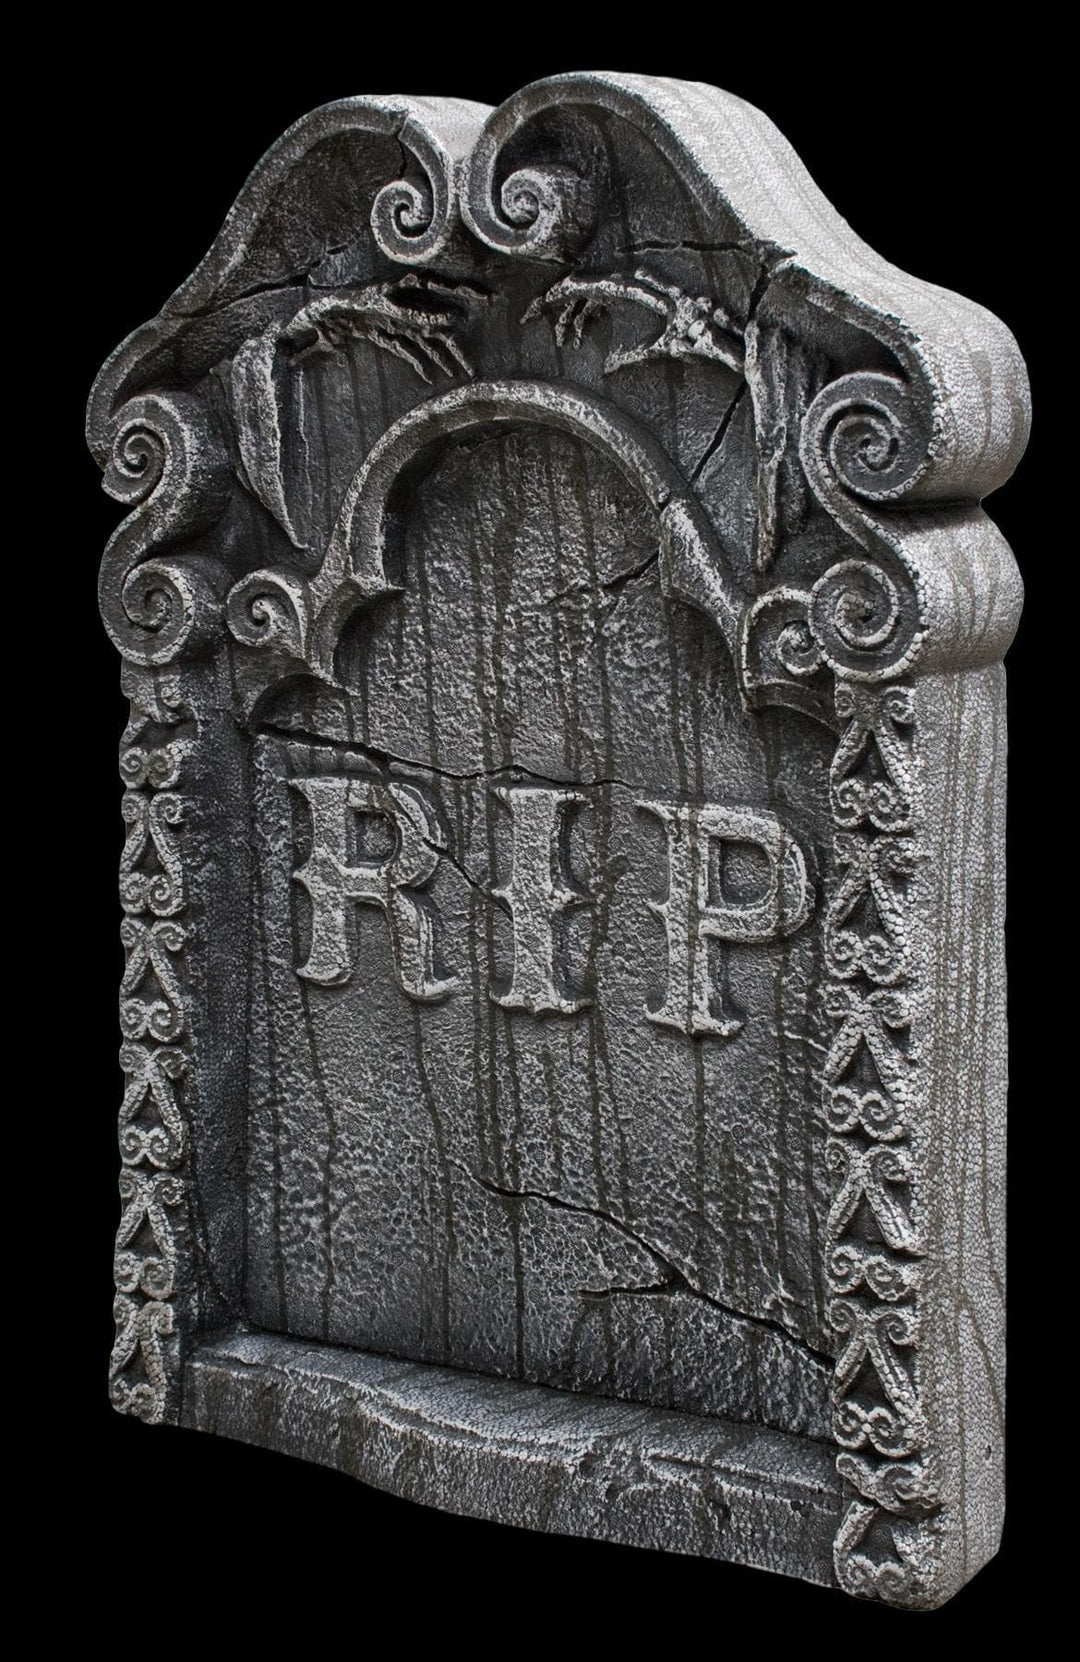 RIP Tombstone Halloween Black Gravestone Bundle With and 